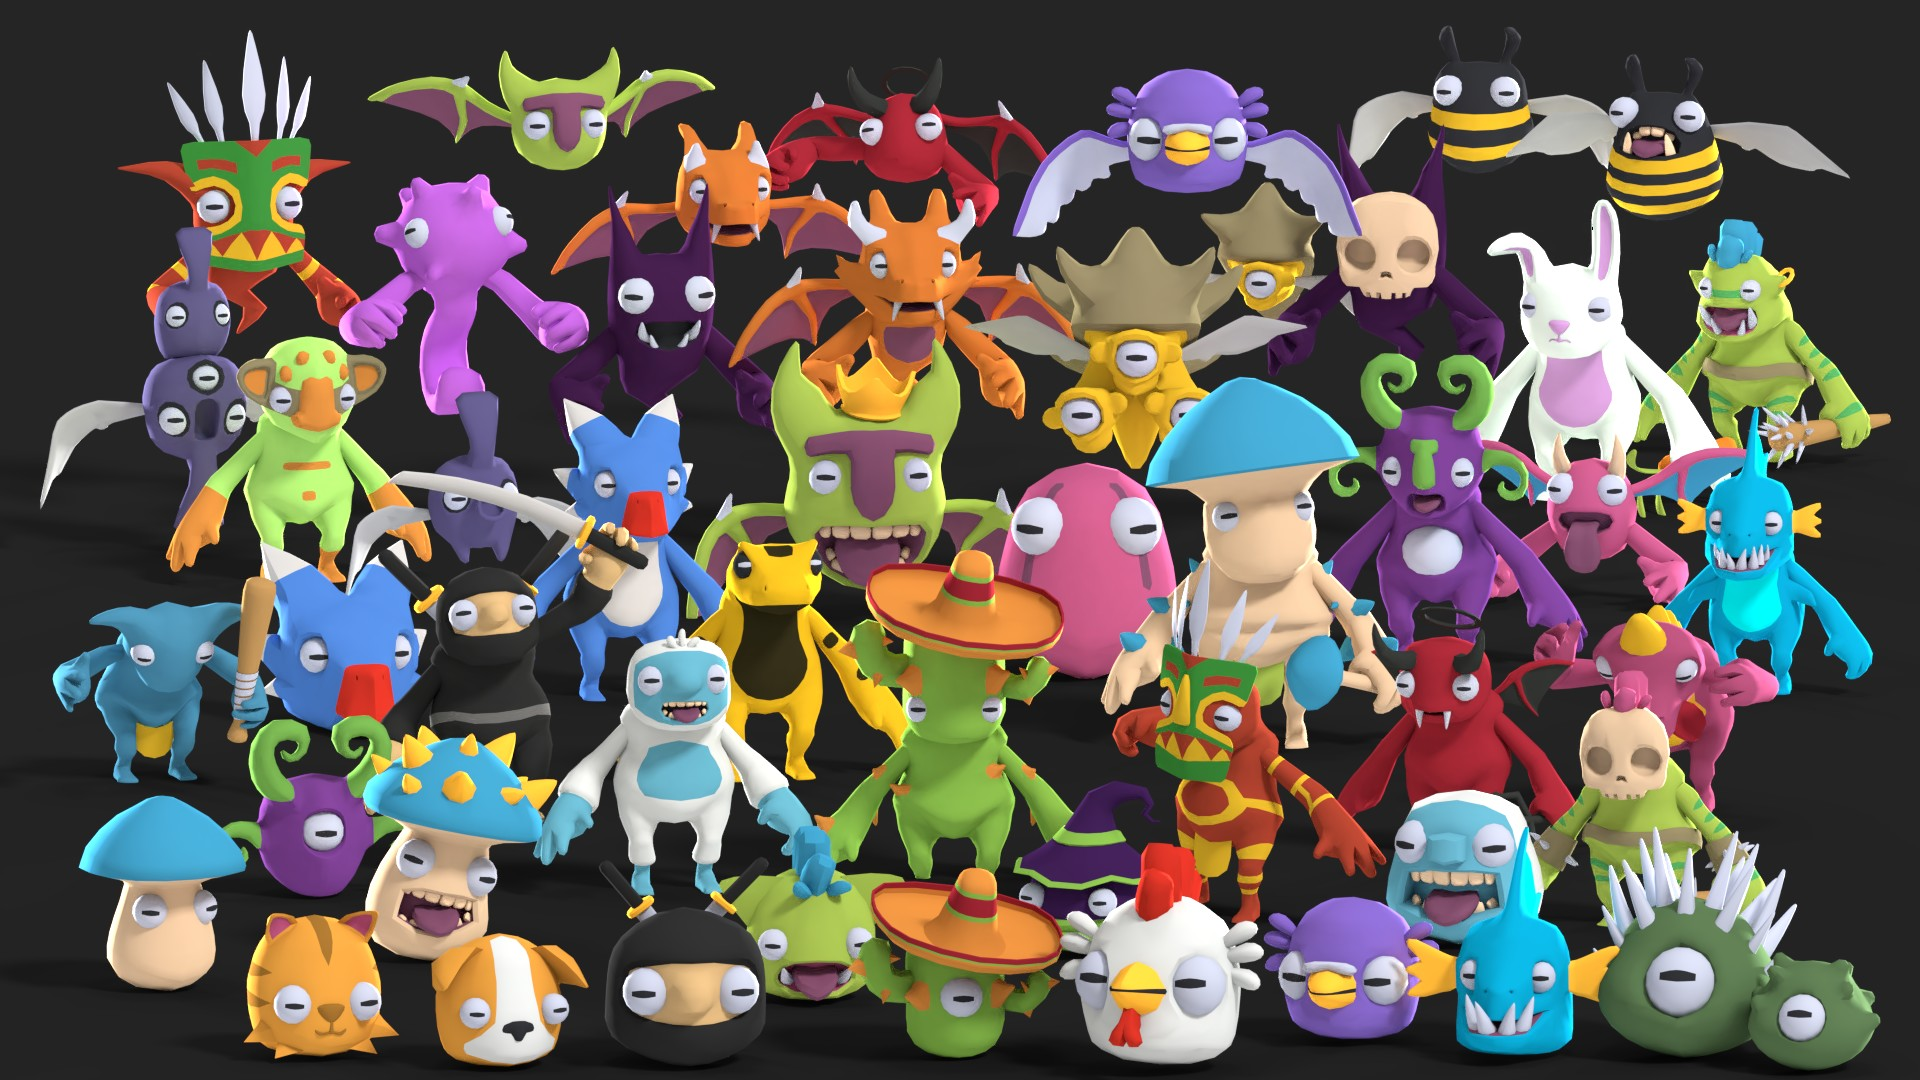 3D Colorful Monsters